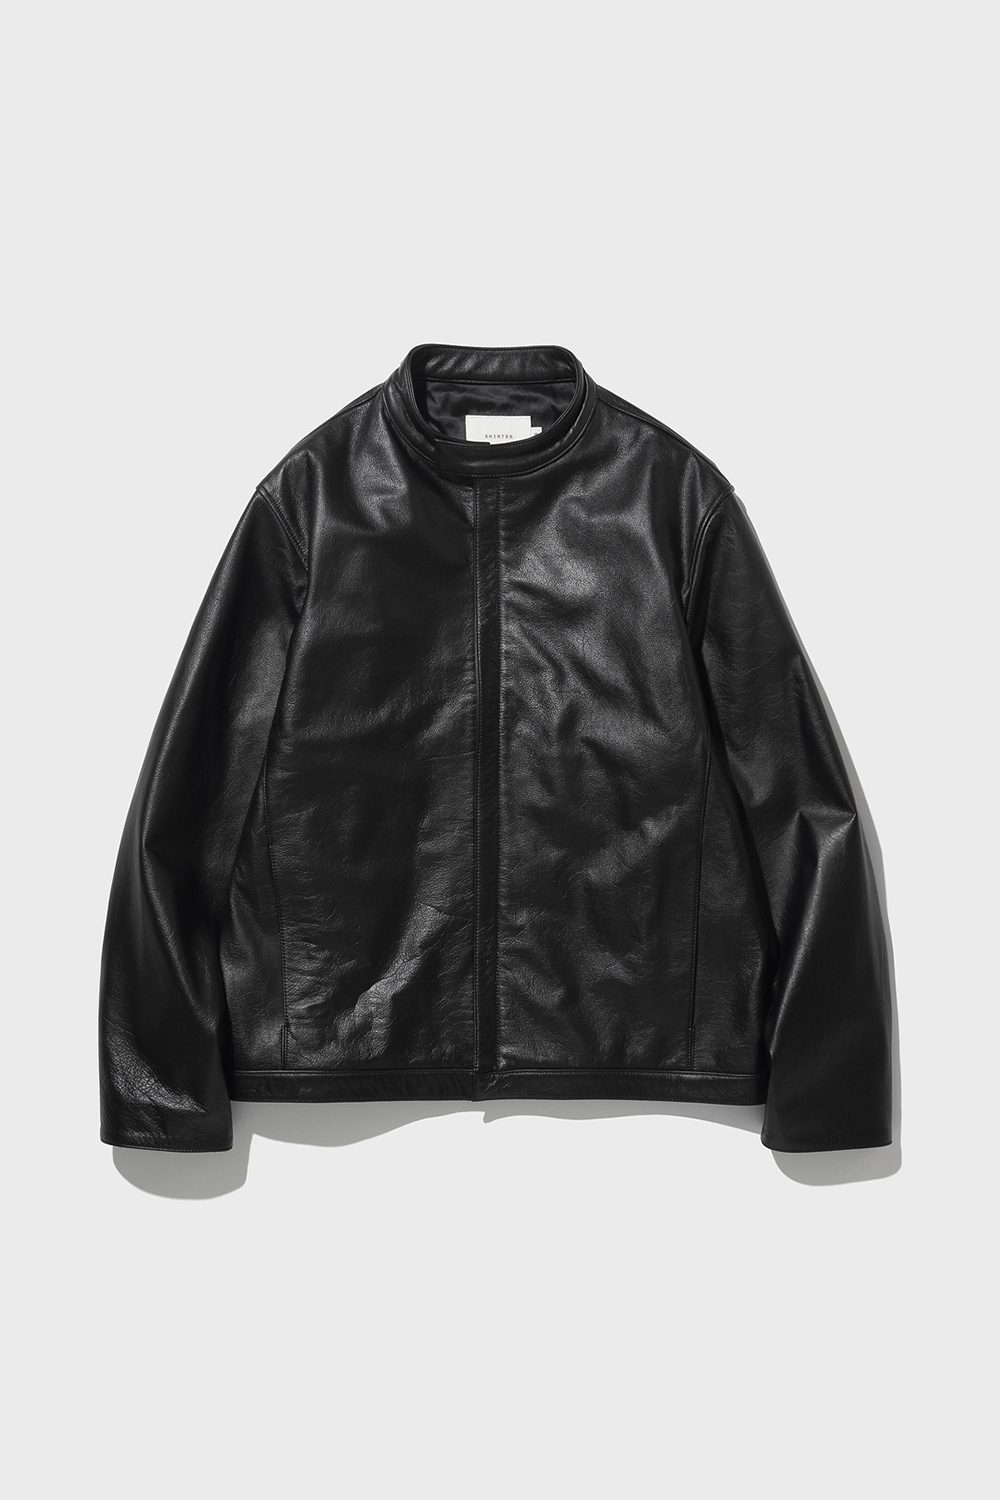 LOWELL COW LEATHER JACKET (BLACK)